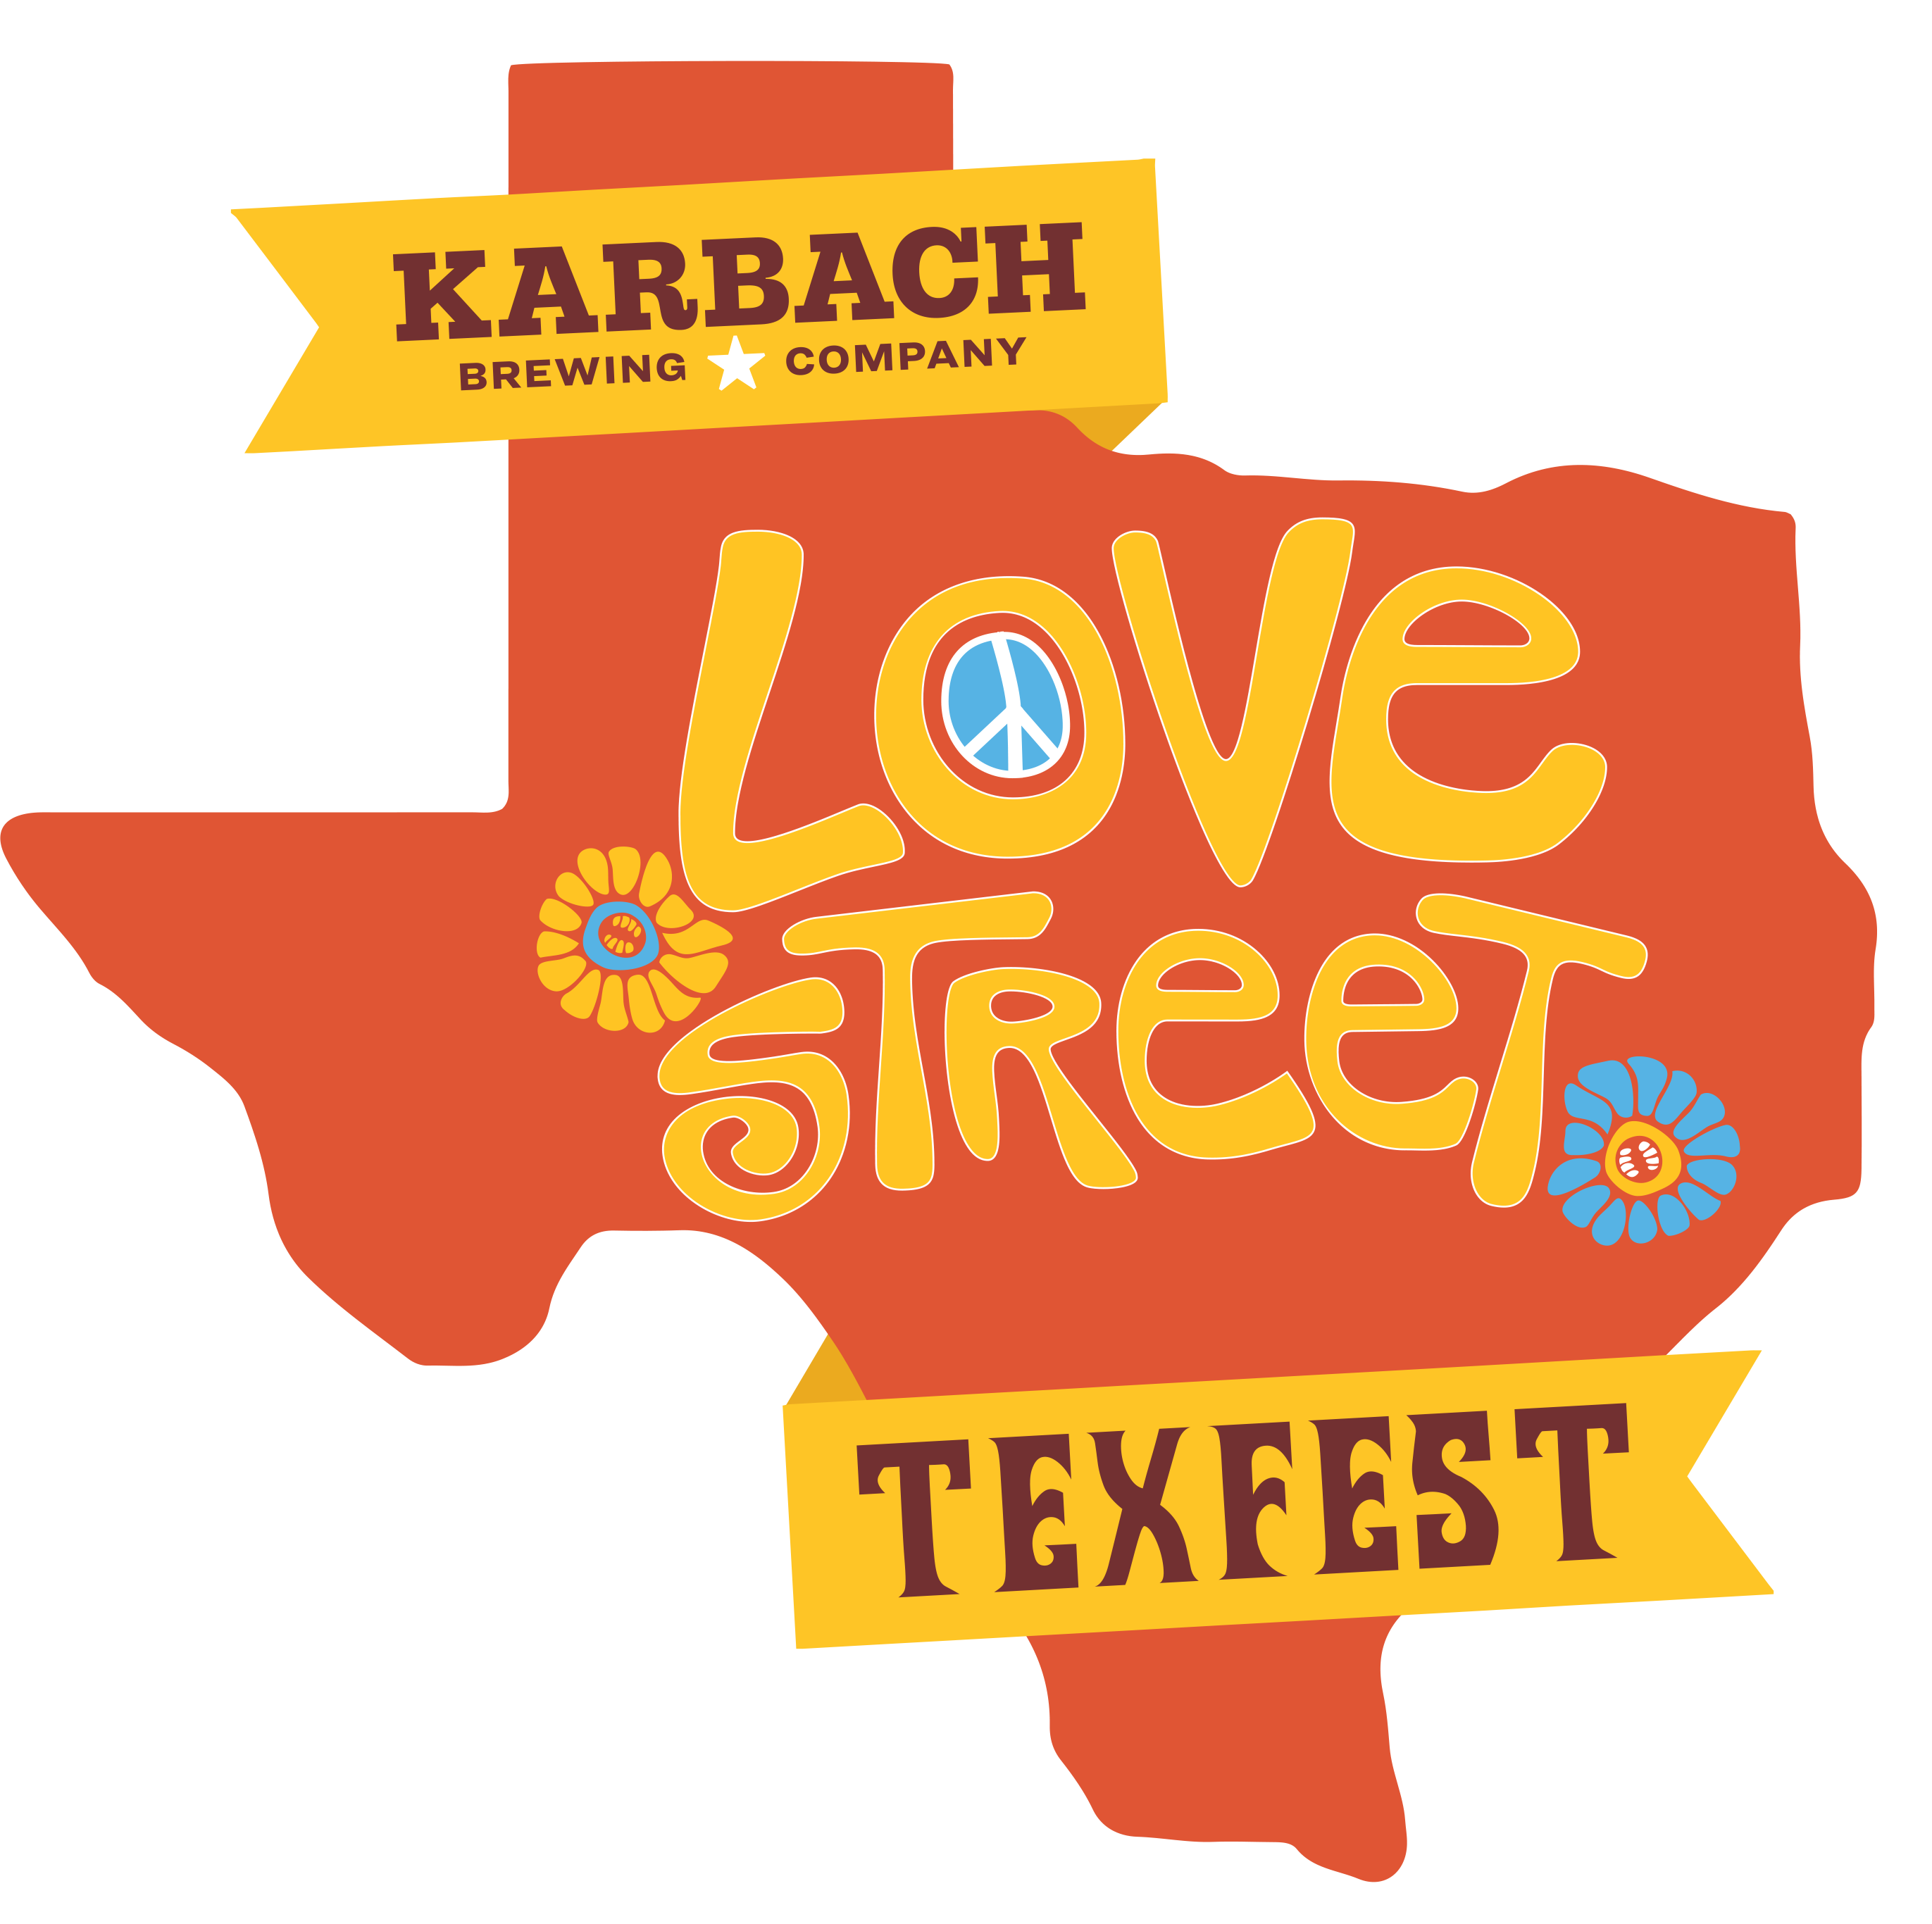 Karbach Brewing Co. Love Street Texfest